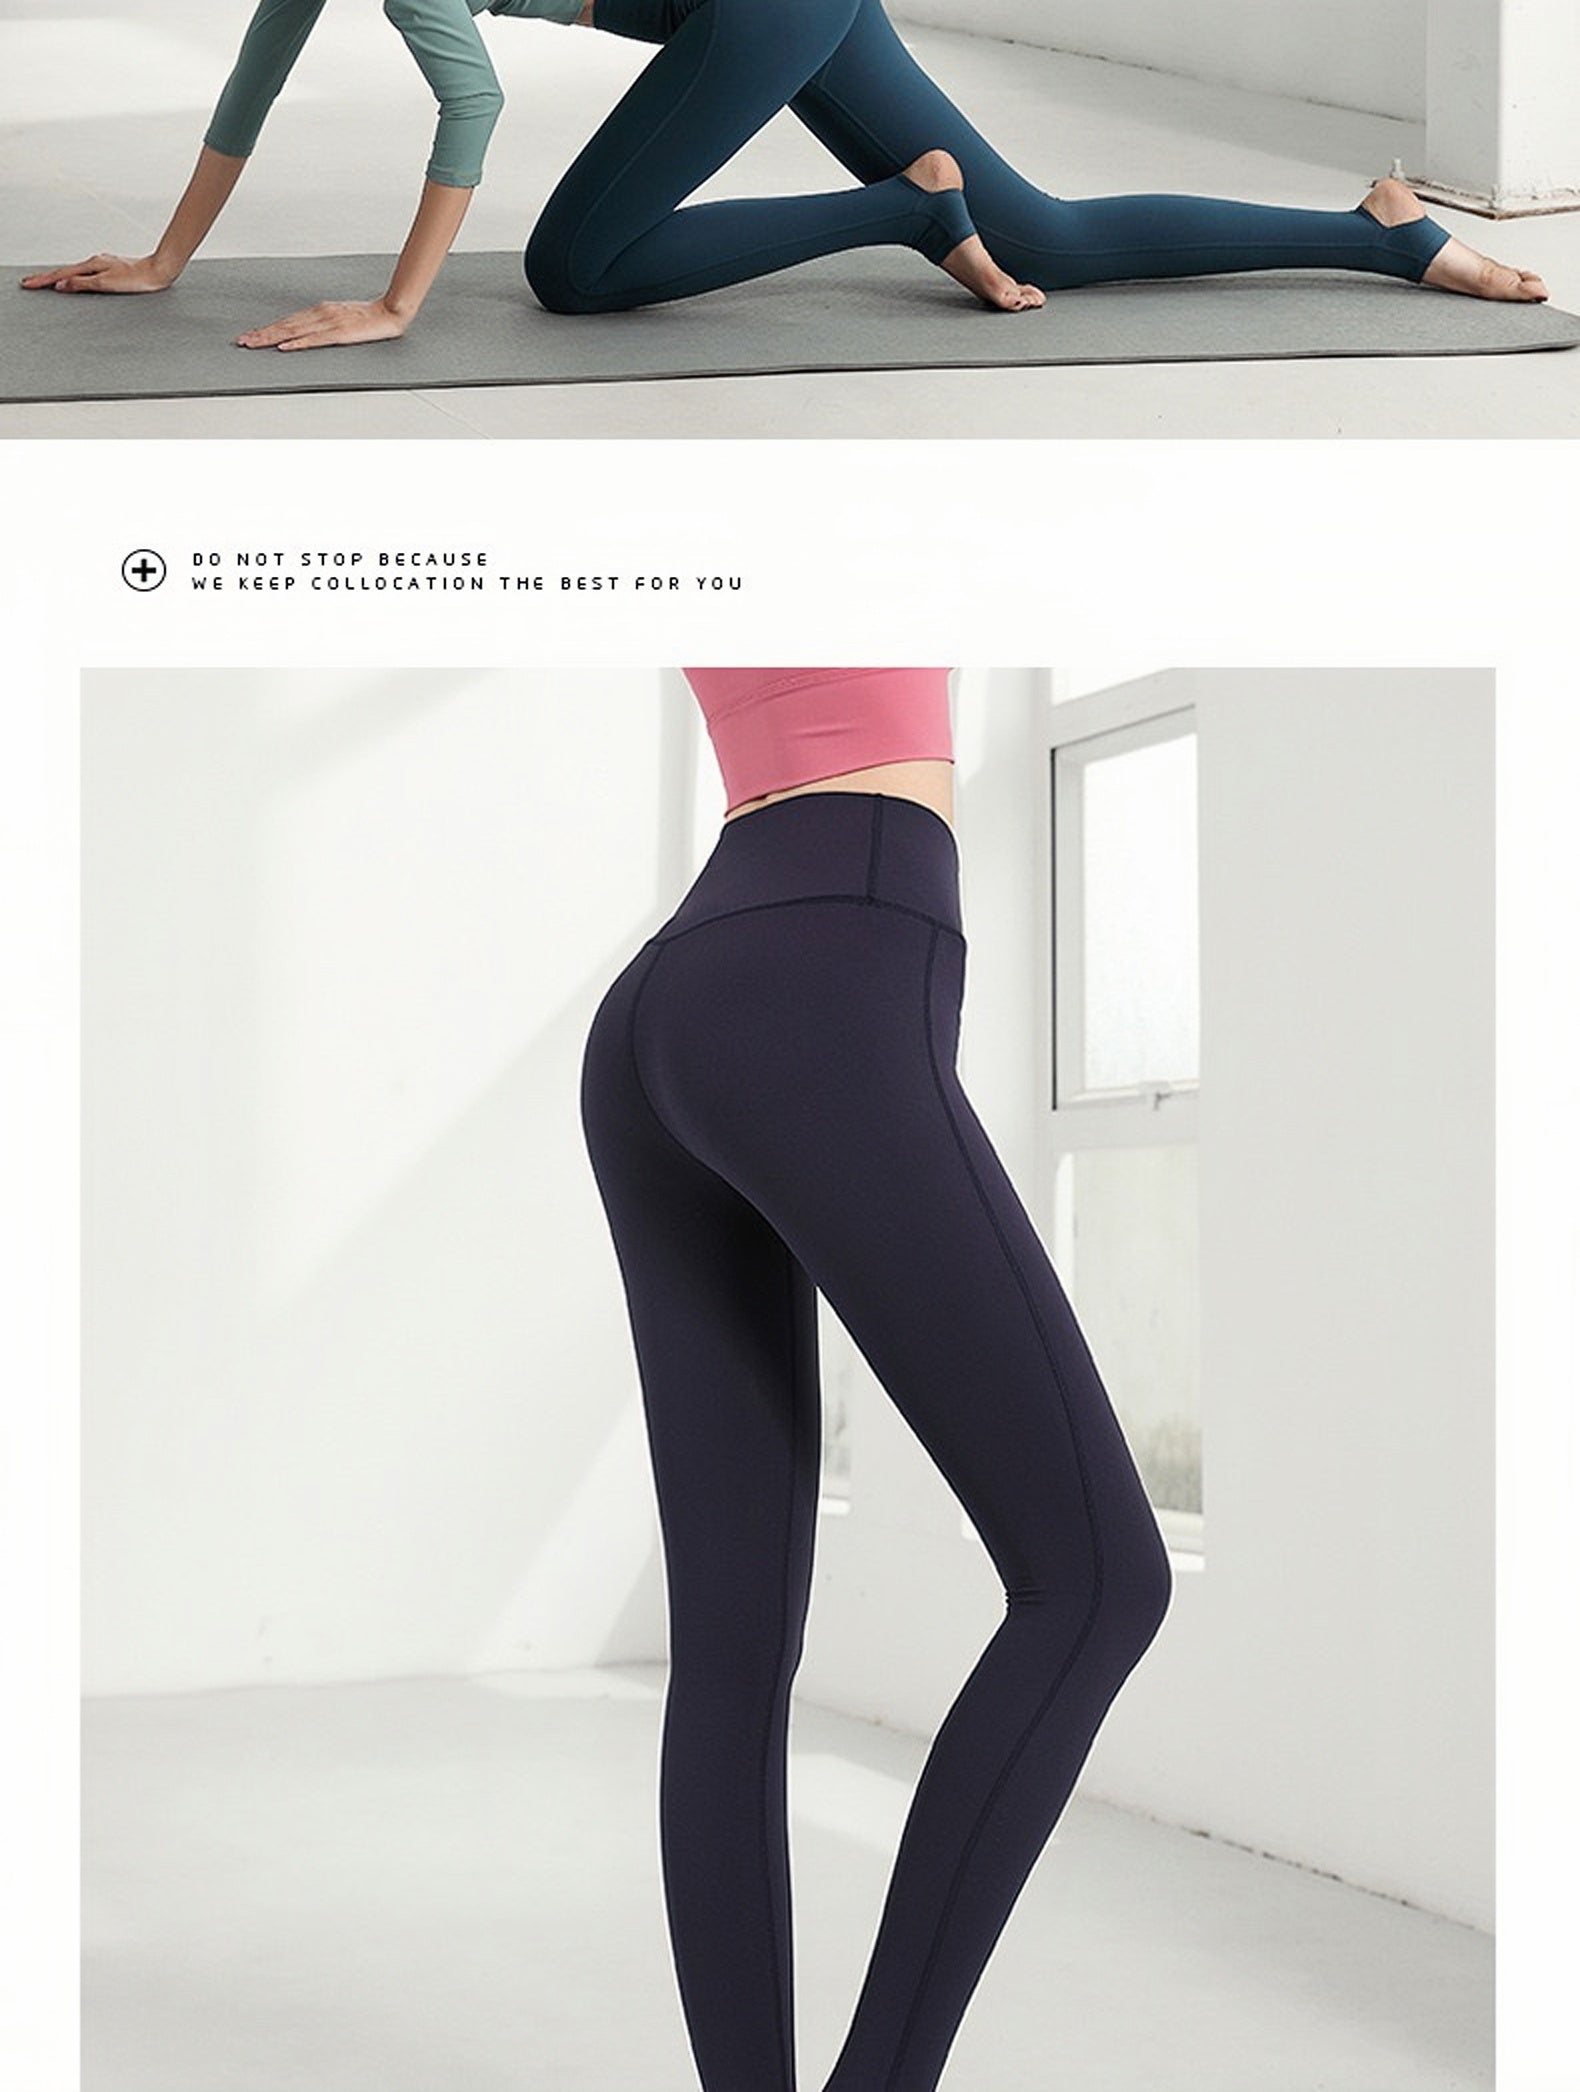 High-waisted butt-lifting skinny pants with a barefeet feel